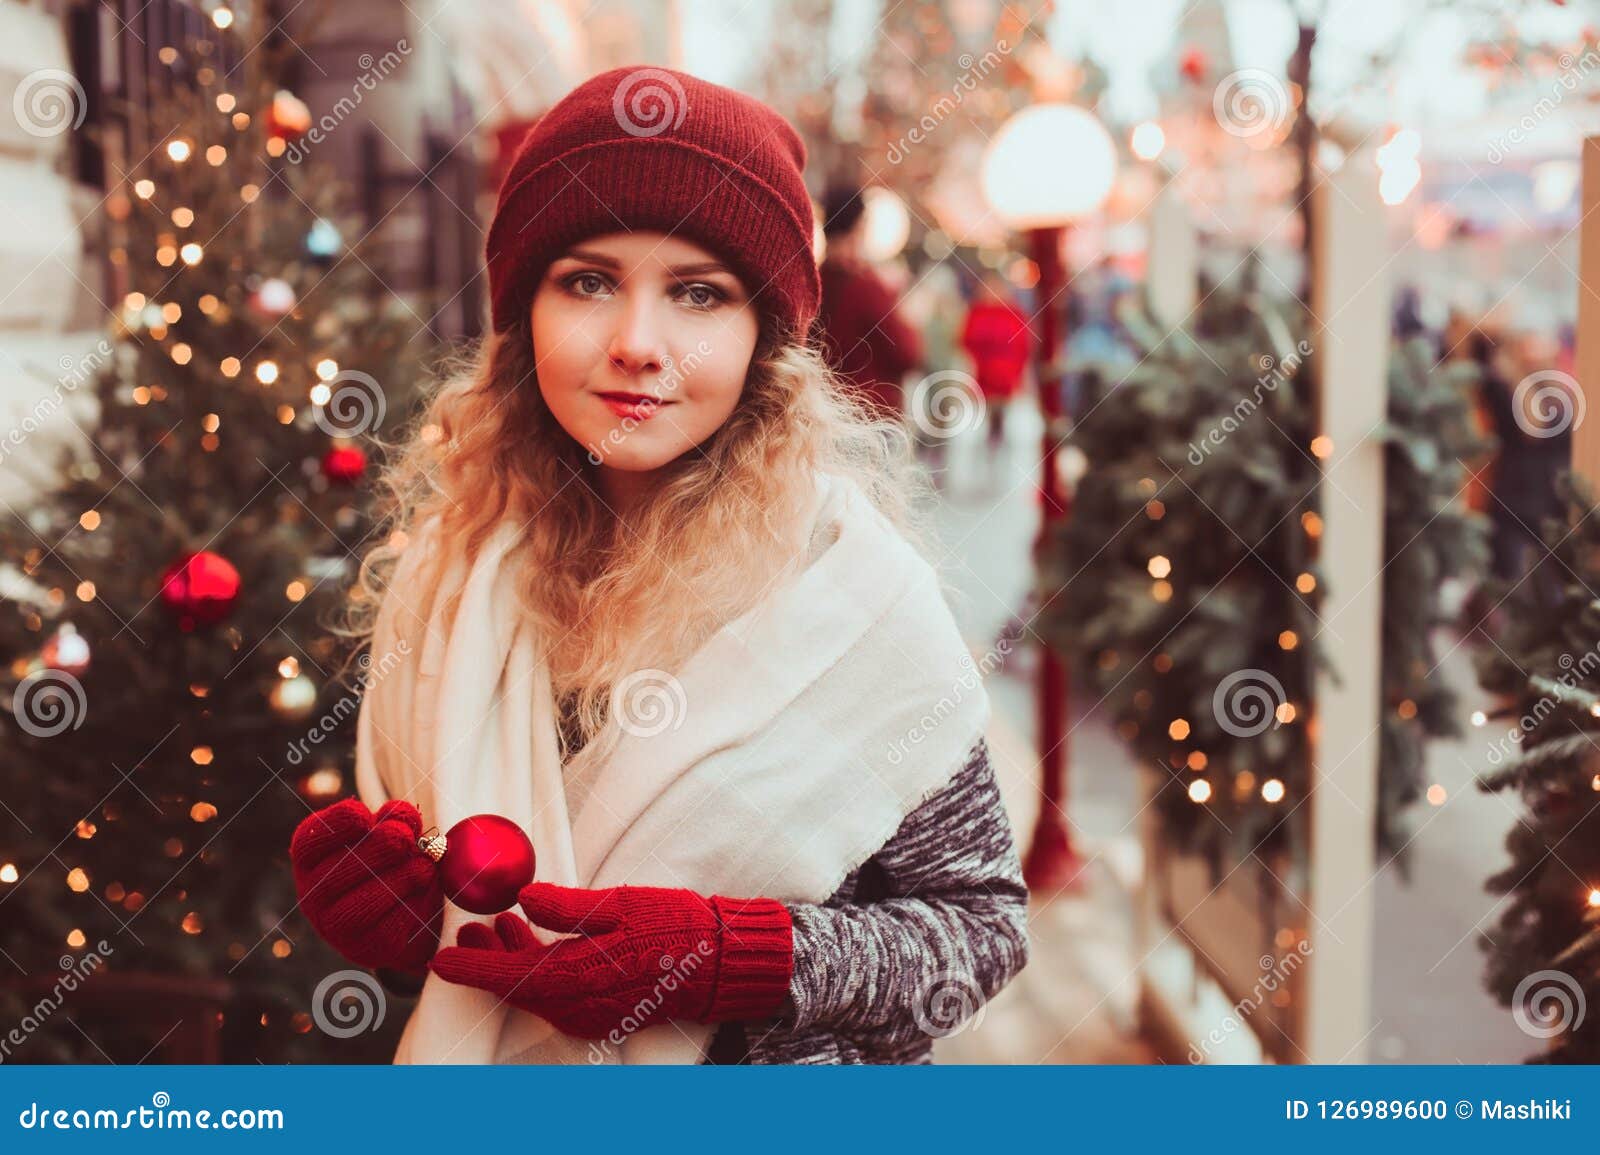 Happy Young Woman Walking in Christmas City Streets, Decorated with ...